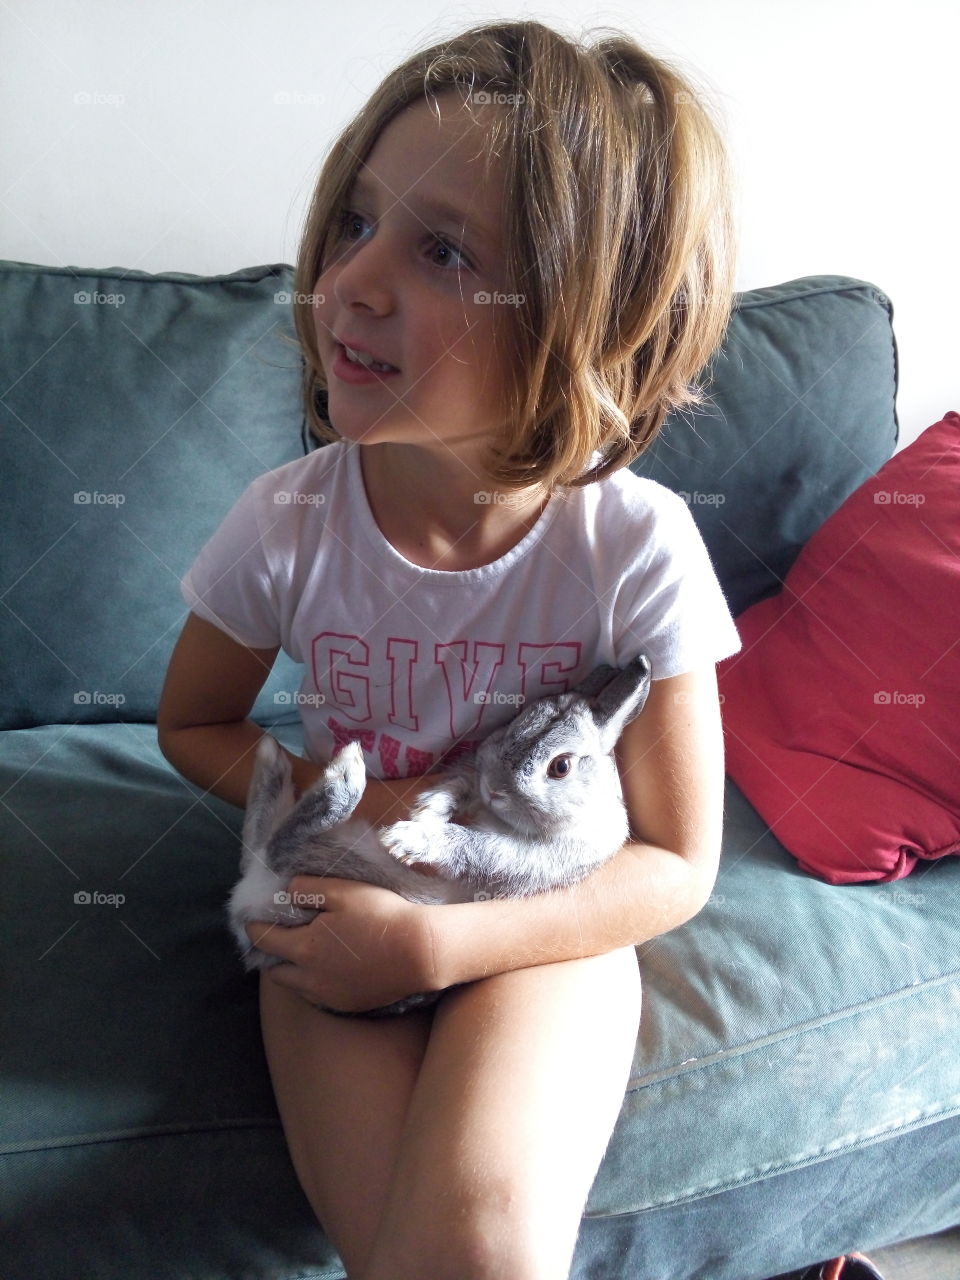 My daughter with our rabbit